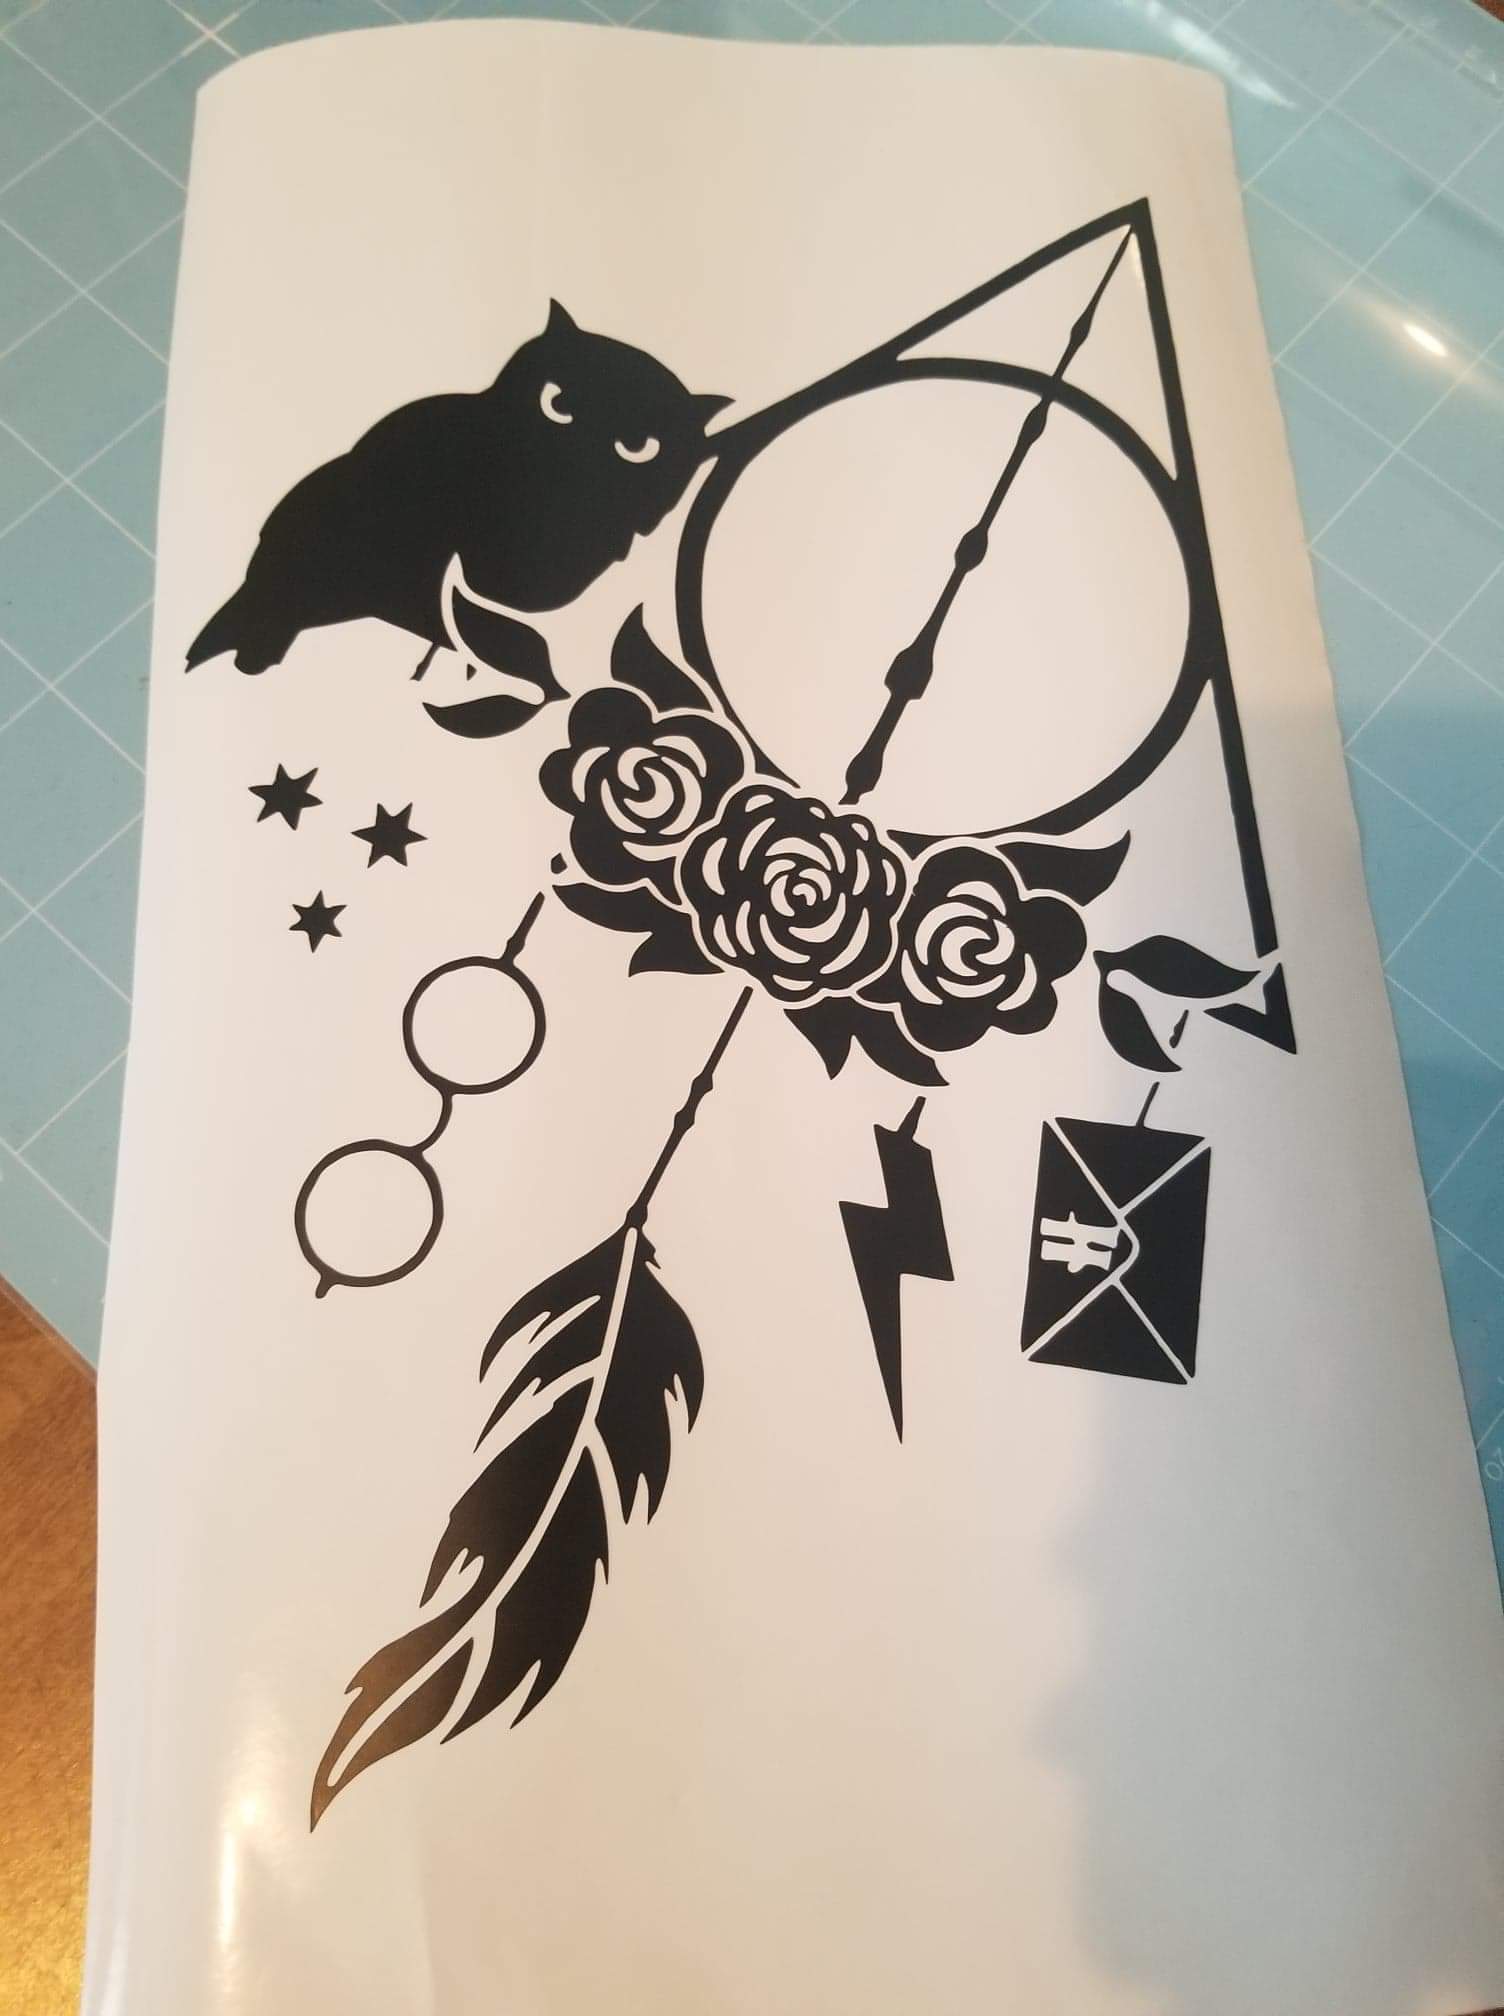 Harrypotter Decal 